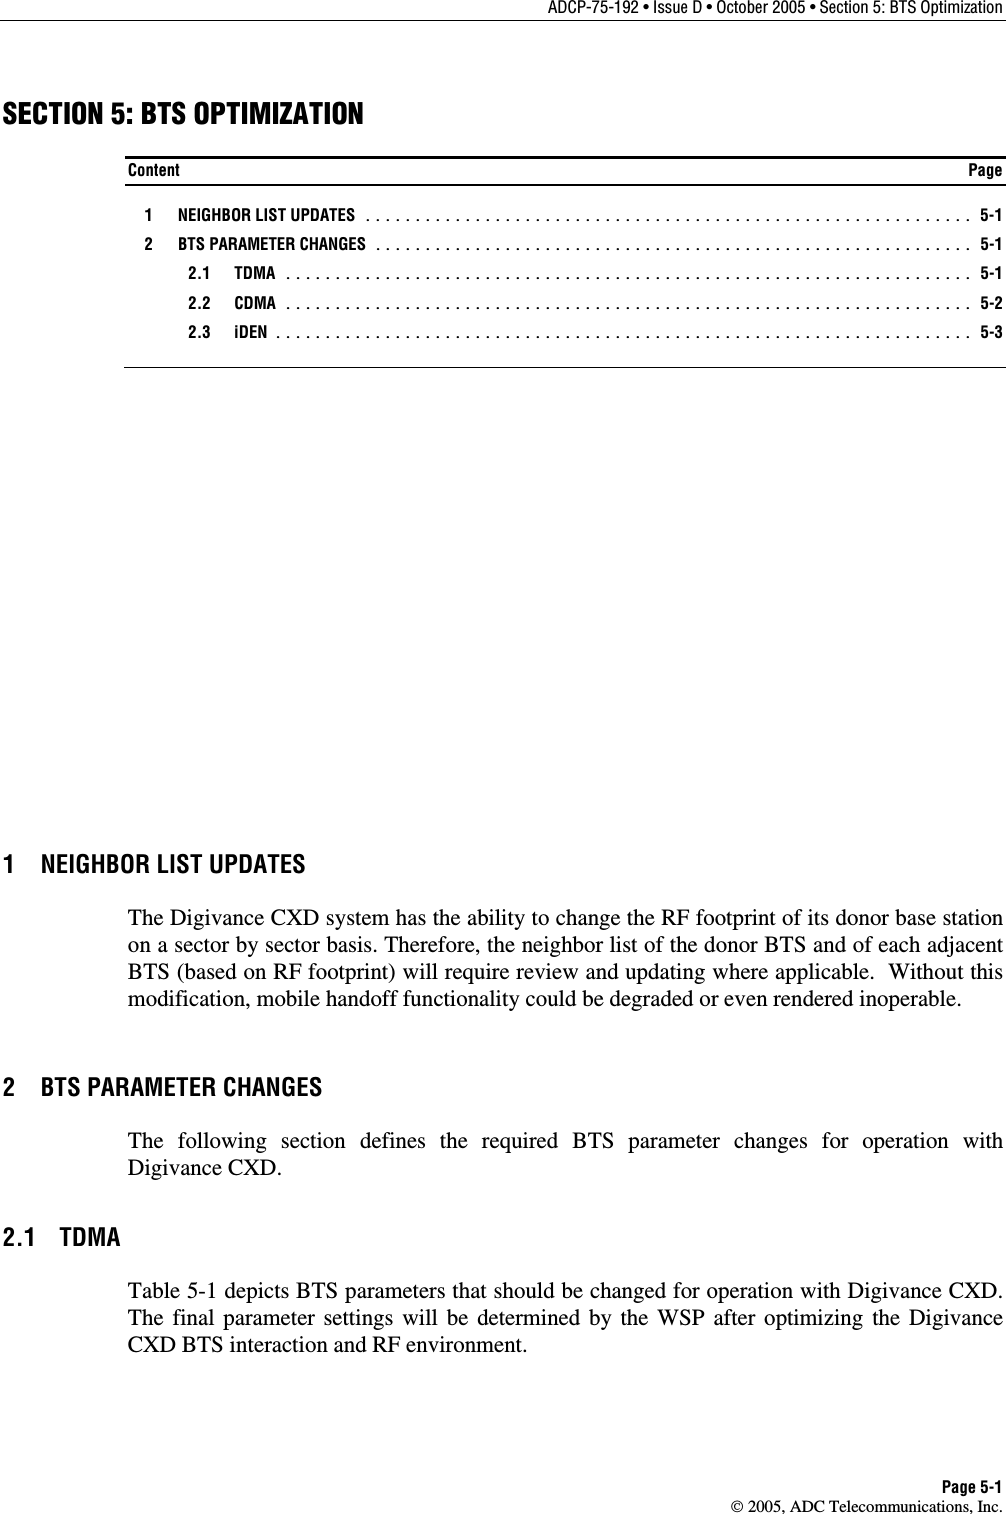 ADCP-75-192 • Issue D • October 2005 • Section 5: BTS Optimization Page 5-1  2005, ADC Telecommunications, Inc. SECTION 5: BTS OPTIMIZATION Content  Page   1  NEIGHBOR LIST UPDATES ............................................................. 5-1   2  BTS PARAMETER CHANGES ............................................................ 5-1  2.1 TDMA ..................................................................... 5-1  2.2 CDMA ..................................................................... 5-2  2.3 iDEN ...................................................................... 5-3 1  NEIGHBOR LIST UPDATES The Digivance CXD system has the ability to change the RF footprint of its donor base station on a sector by sector basis. Therefore, the neighbor list of the donor BTS and of each adjacent BTS (based on RF footprint) will require review and updating where applicable.  Without this modification, mobile handoff functionality could be degraded or even rendered inoperable. 2  BTS PARAMETER CHANGES The following section defines the required BTS parameter changes for operation with Digivance CXD. 2.1 TDMA Table 5-1 depicts BTS parameters that should be changed for operation with Digivance CXD. The final parameter settings will be determined by the WSP after optimizing the Digivance CXD BTS interaction and RF environment. 